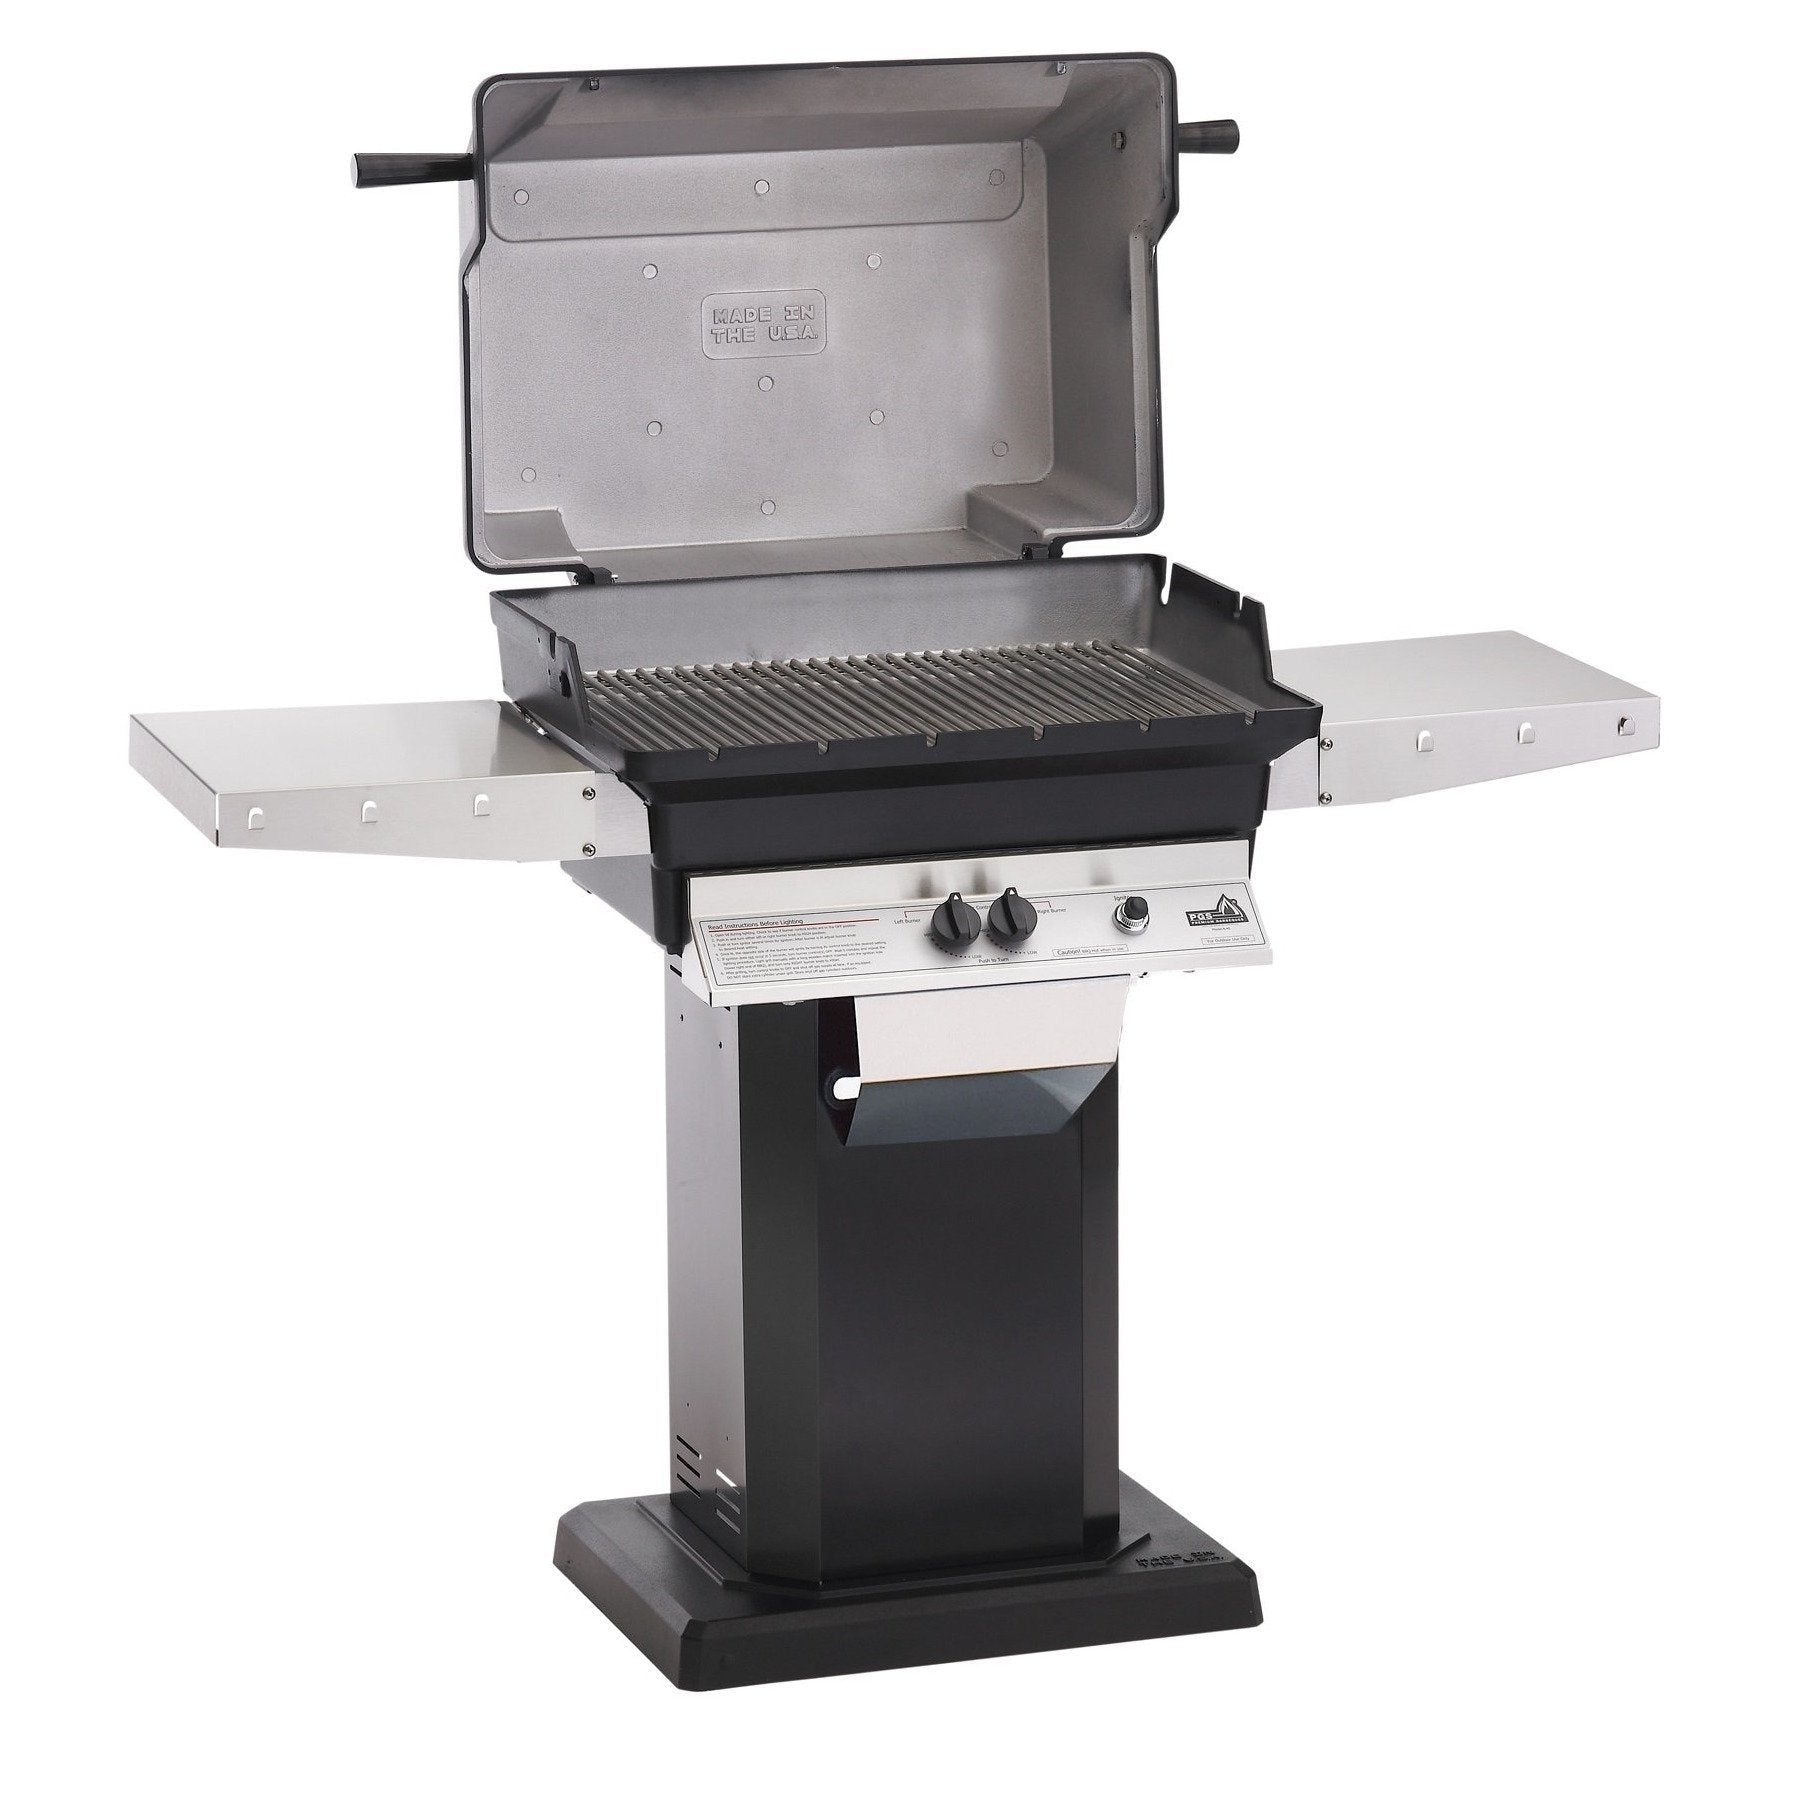 PGS "A" Series Natural Gas Grill 40,000 BTUs - A40NG Performance Grilling Systems Black Powder Coated Pedestal + Flat Patio Base 